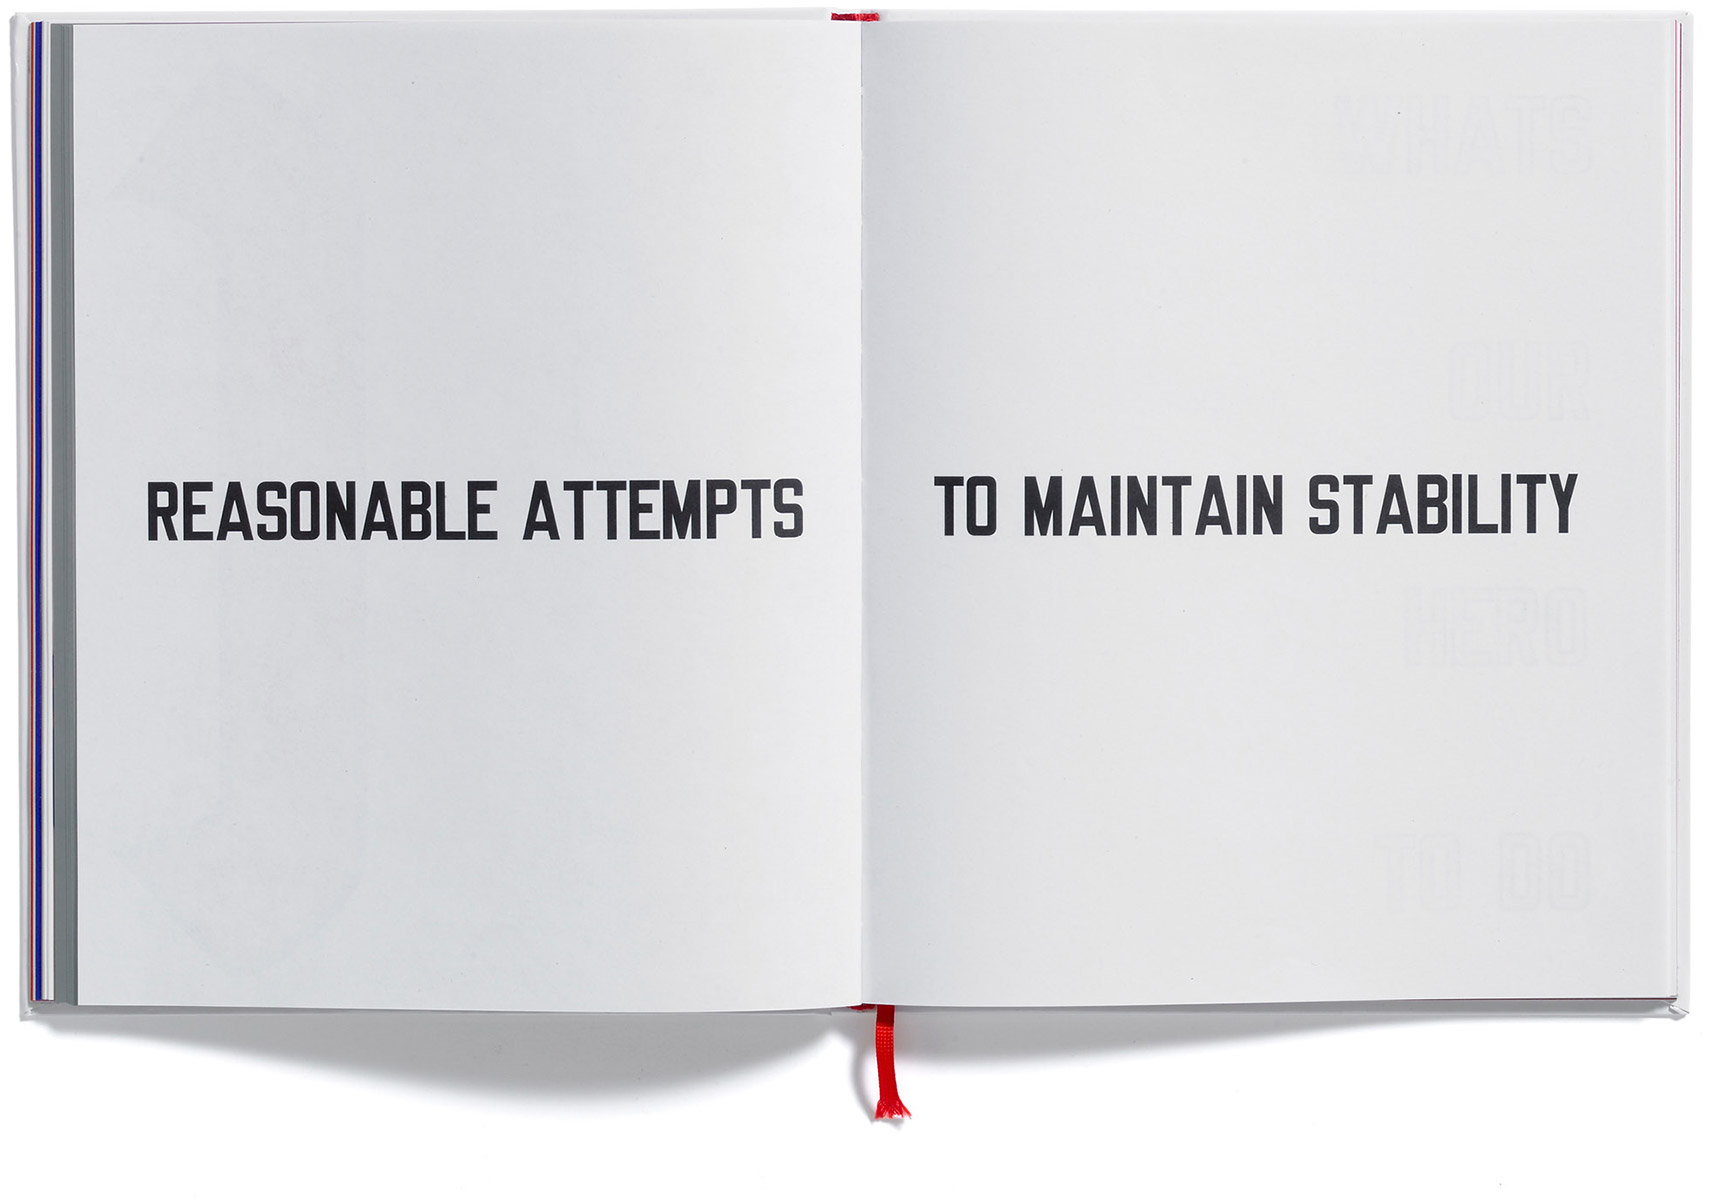 Browns Editions, Browns Editions Publishing, Browns Editions Books, Browns Editions Lawrence Weiner, Browns Editions HSP Lecture Series 4, Browns Editions Lawrence Weiner HSP Lecture Series 4